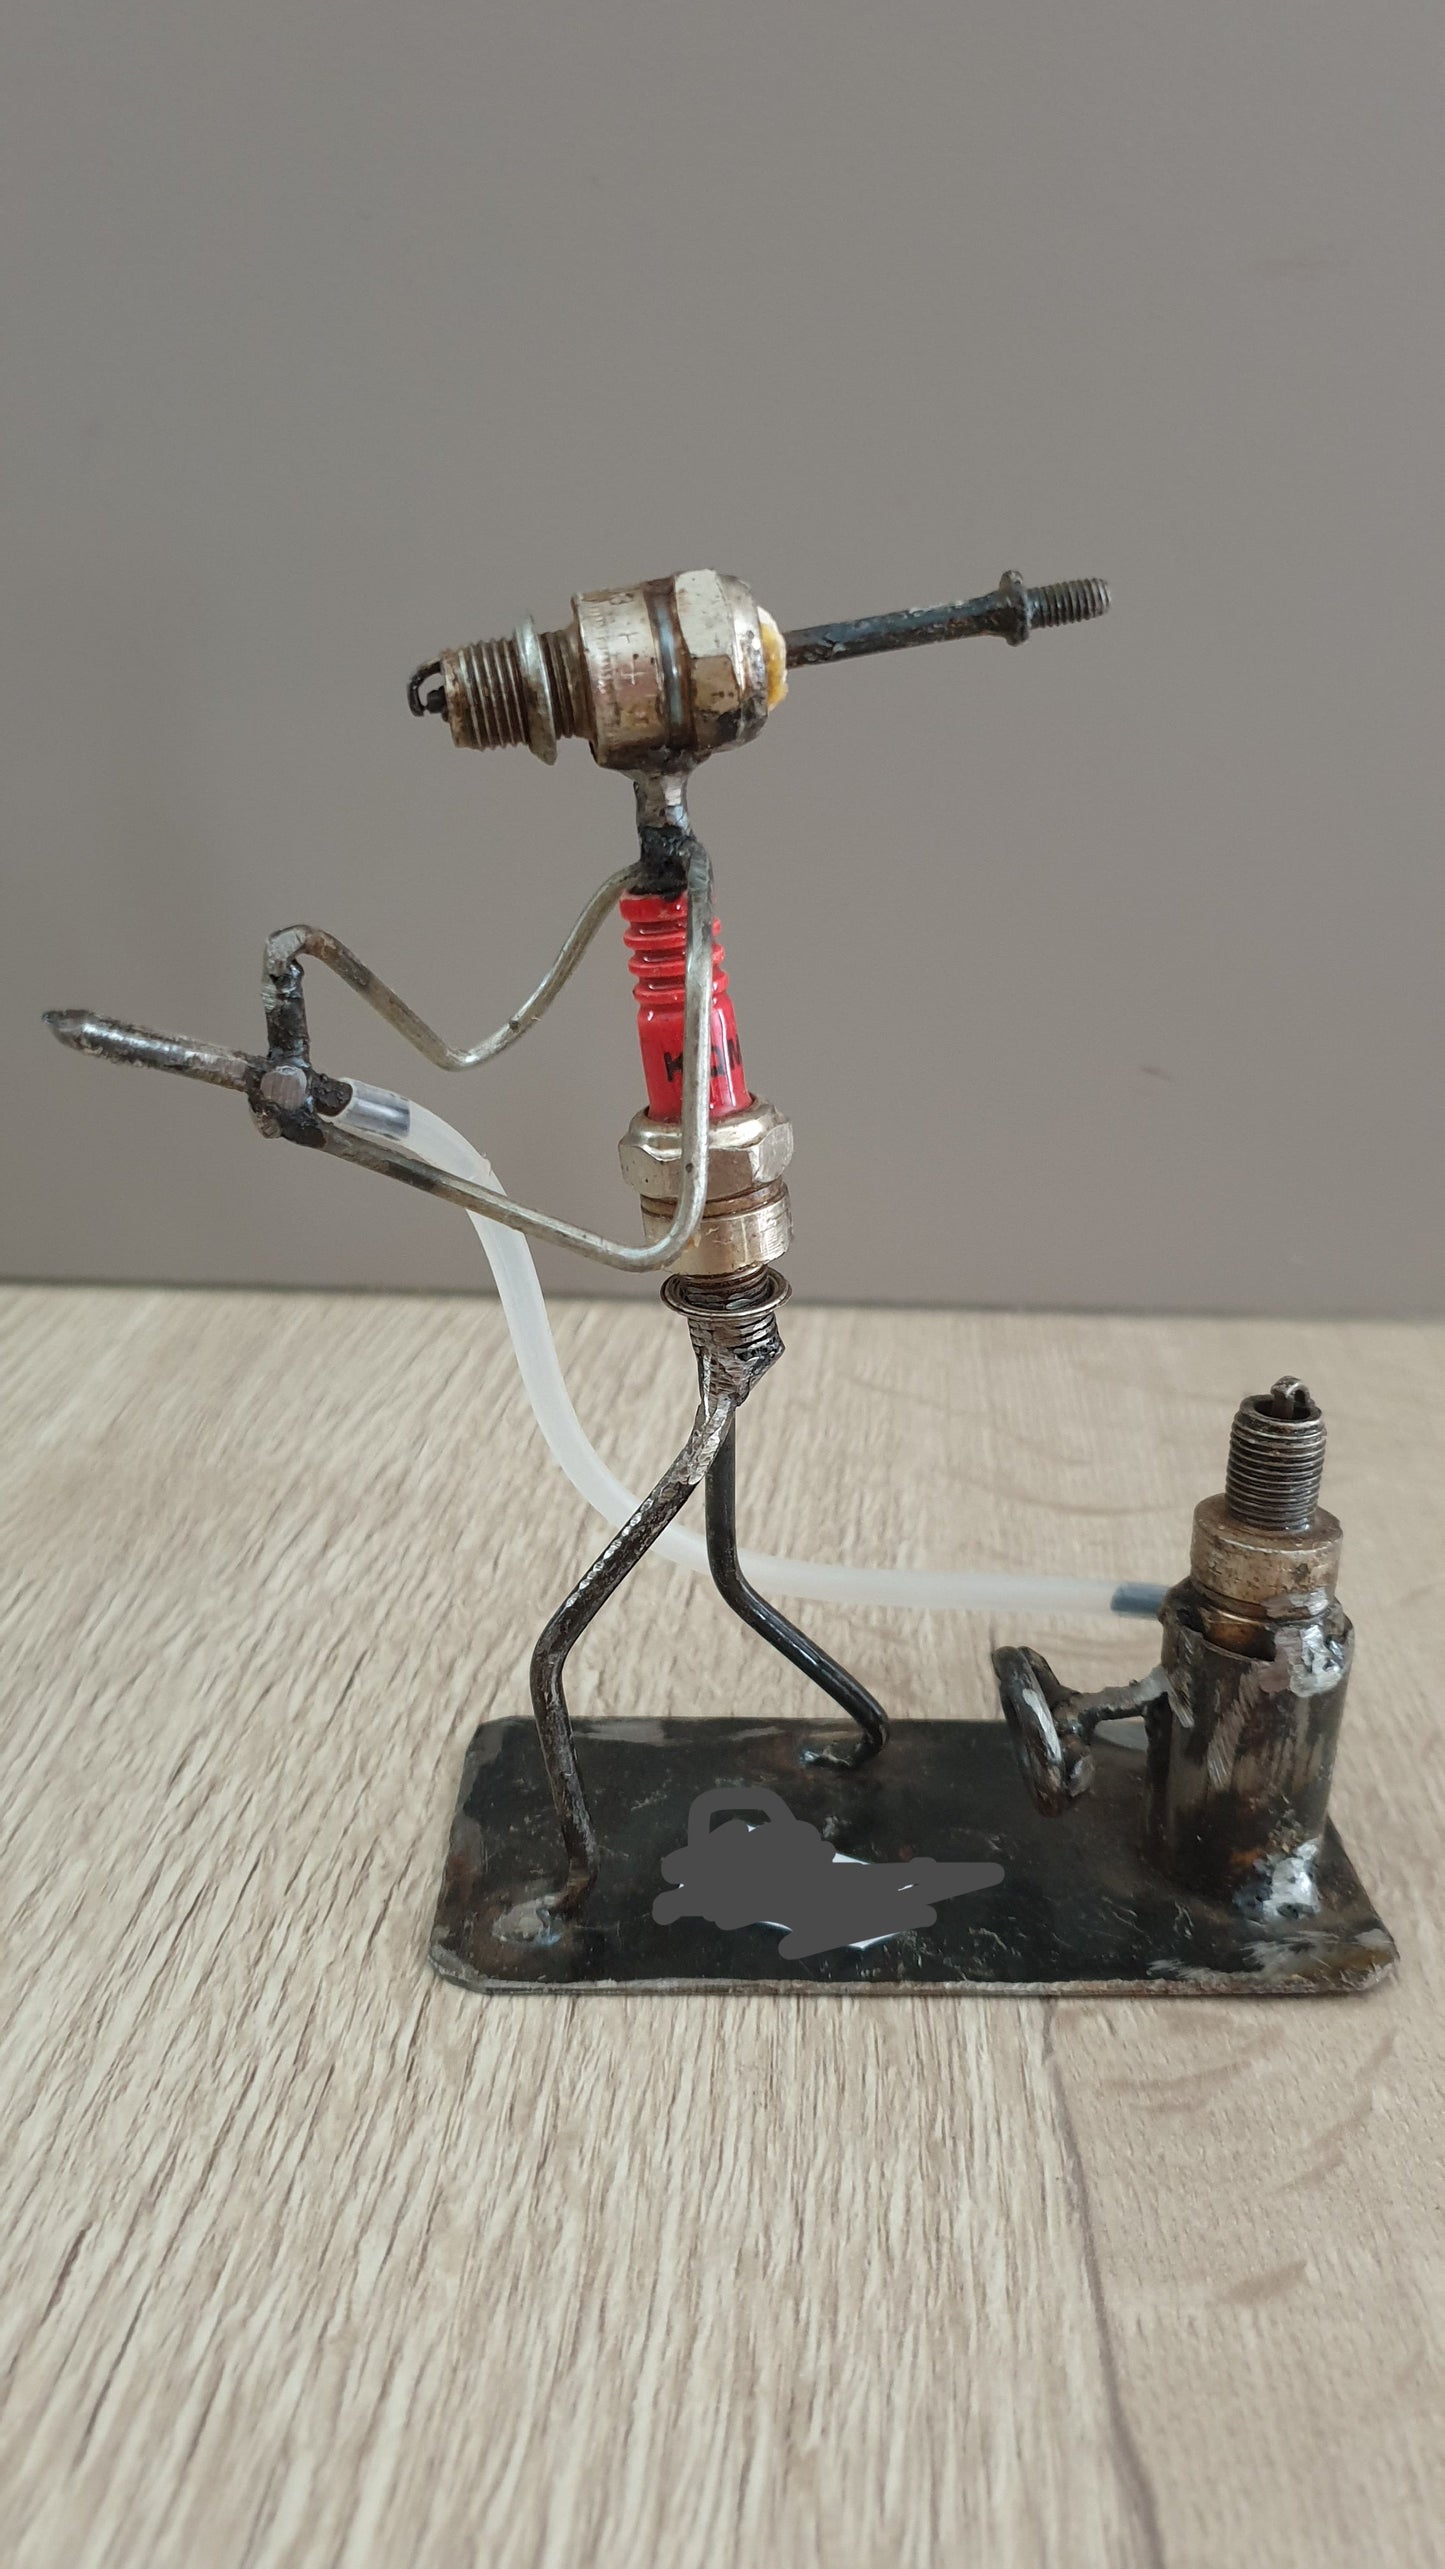 Figurines with candles and recycled materials